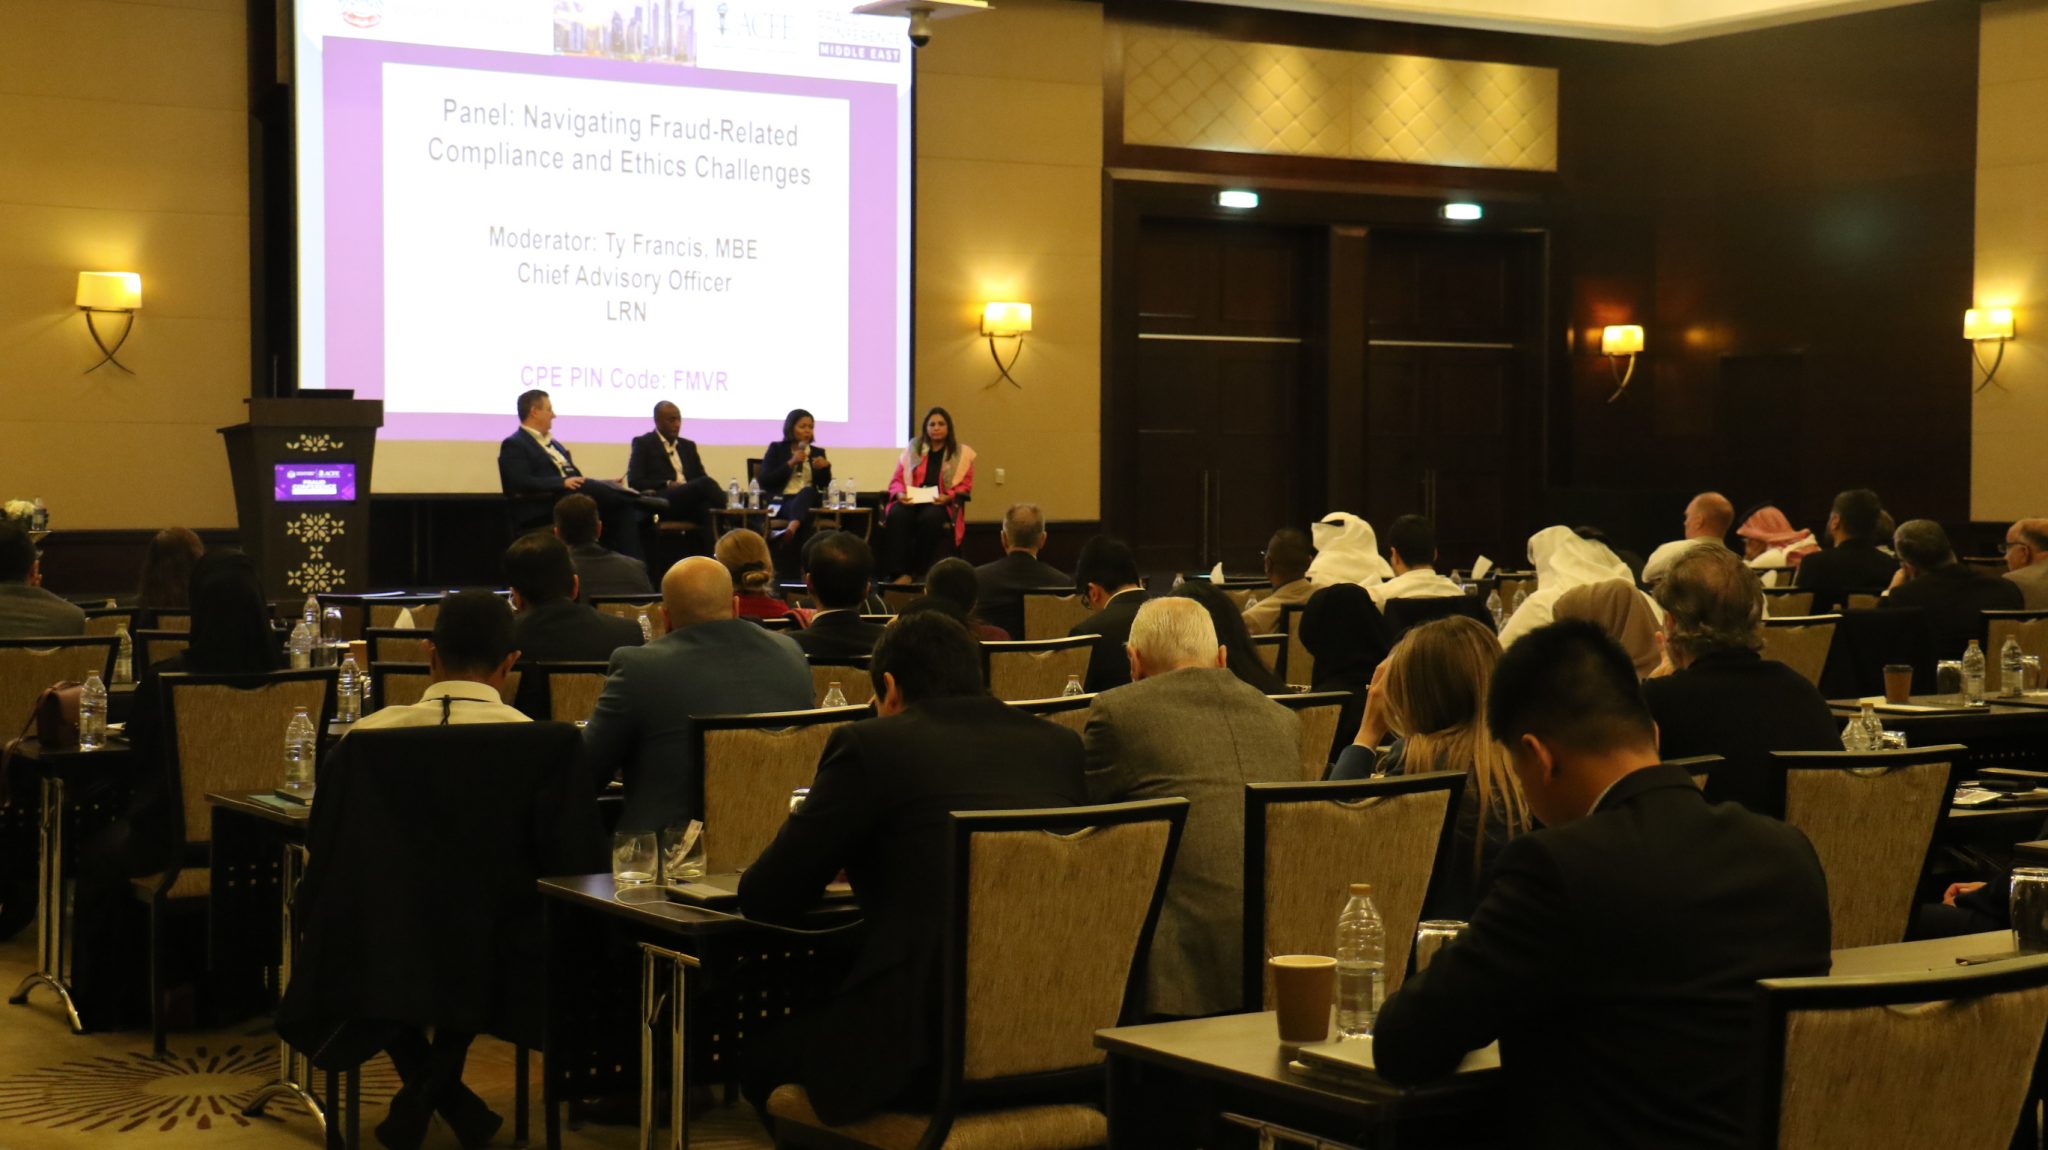 ACFE Fraud Conference Middle East 2023 - Image 1 - CRI Group